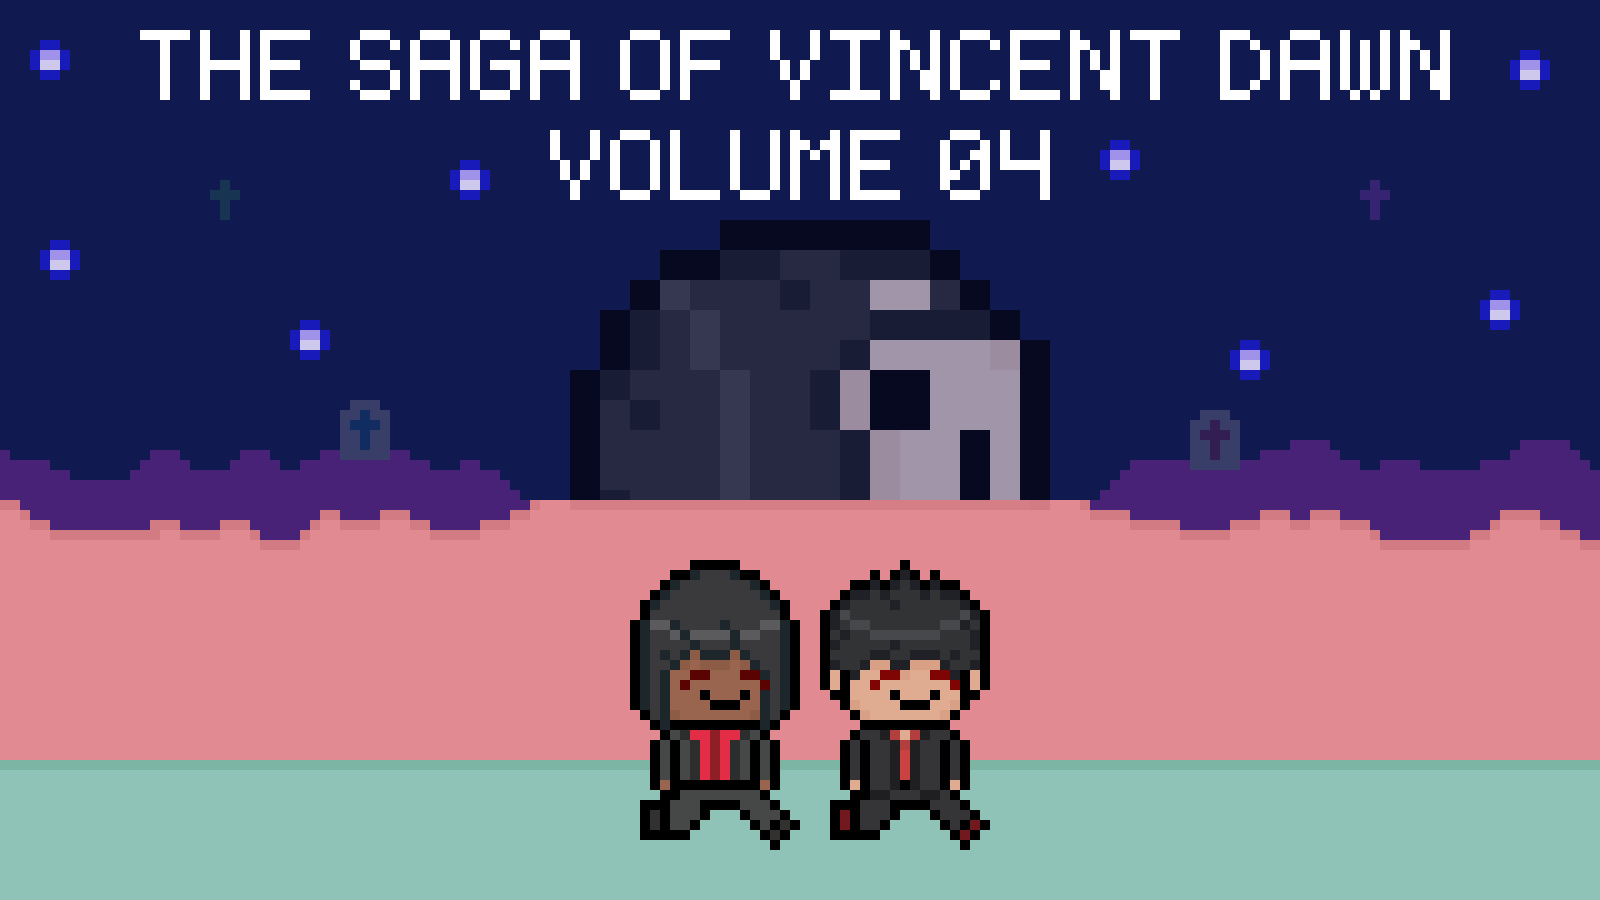 the-saga-of-vincent-dawn-ch-04.png